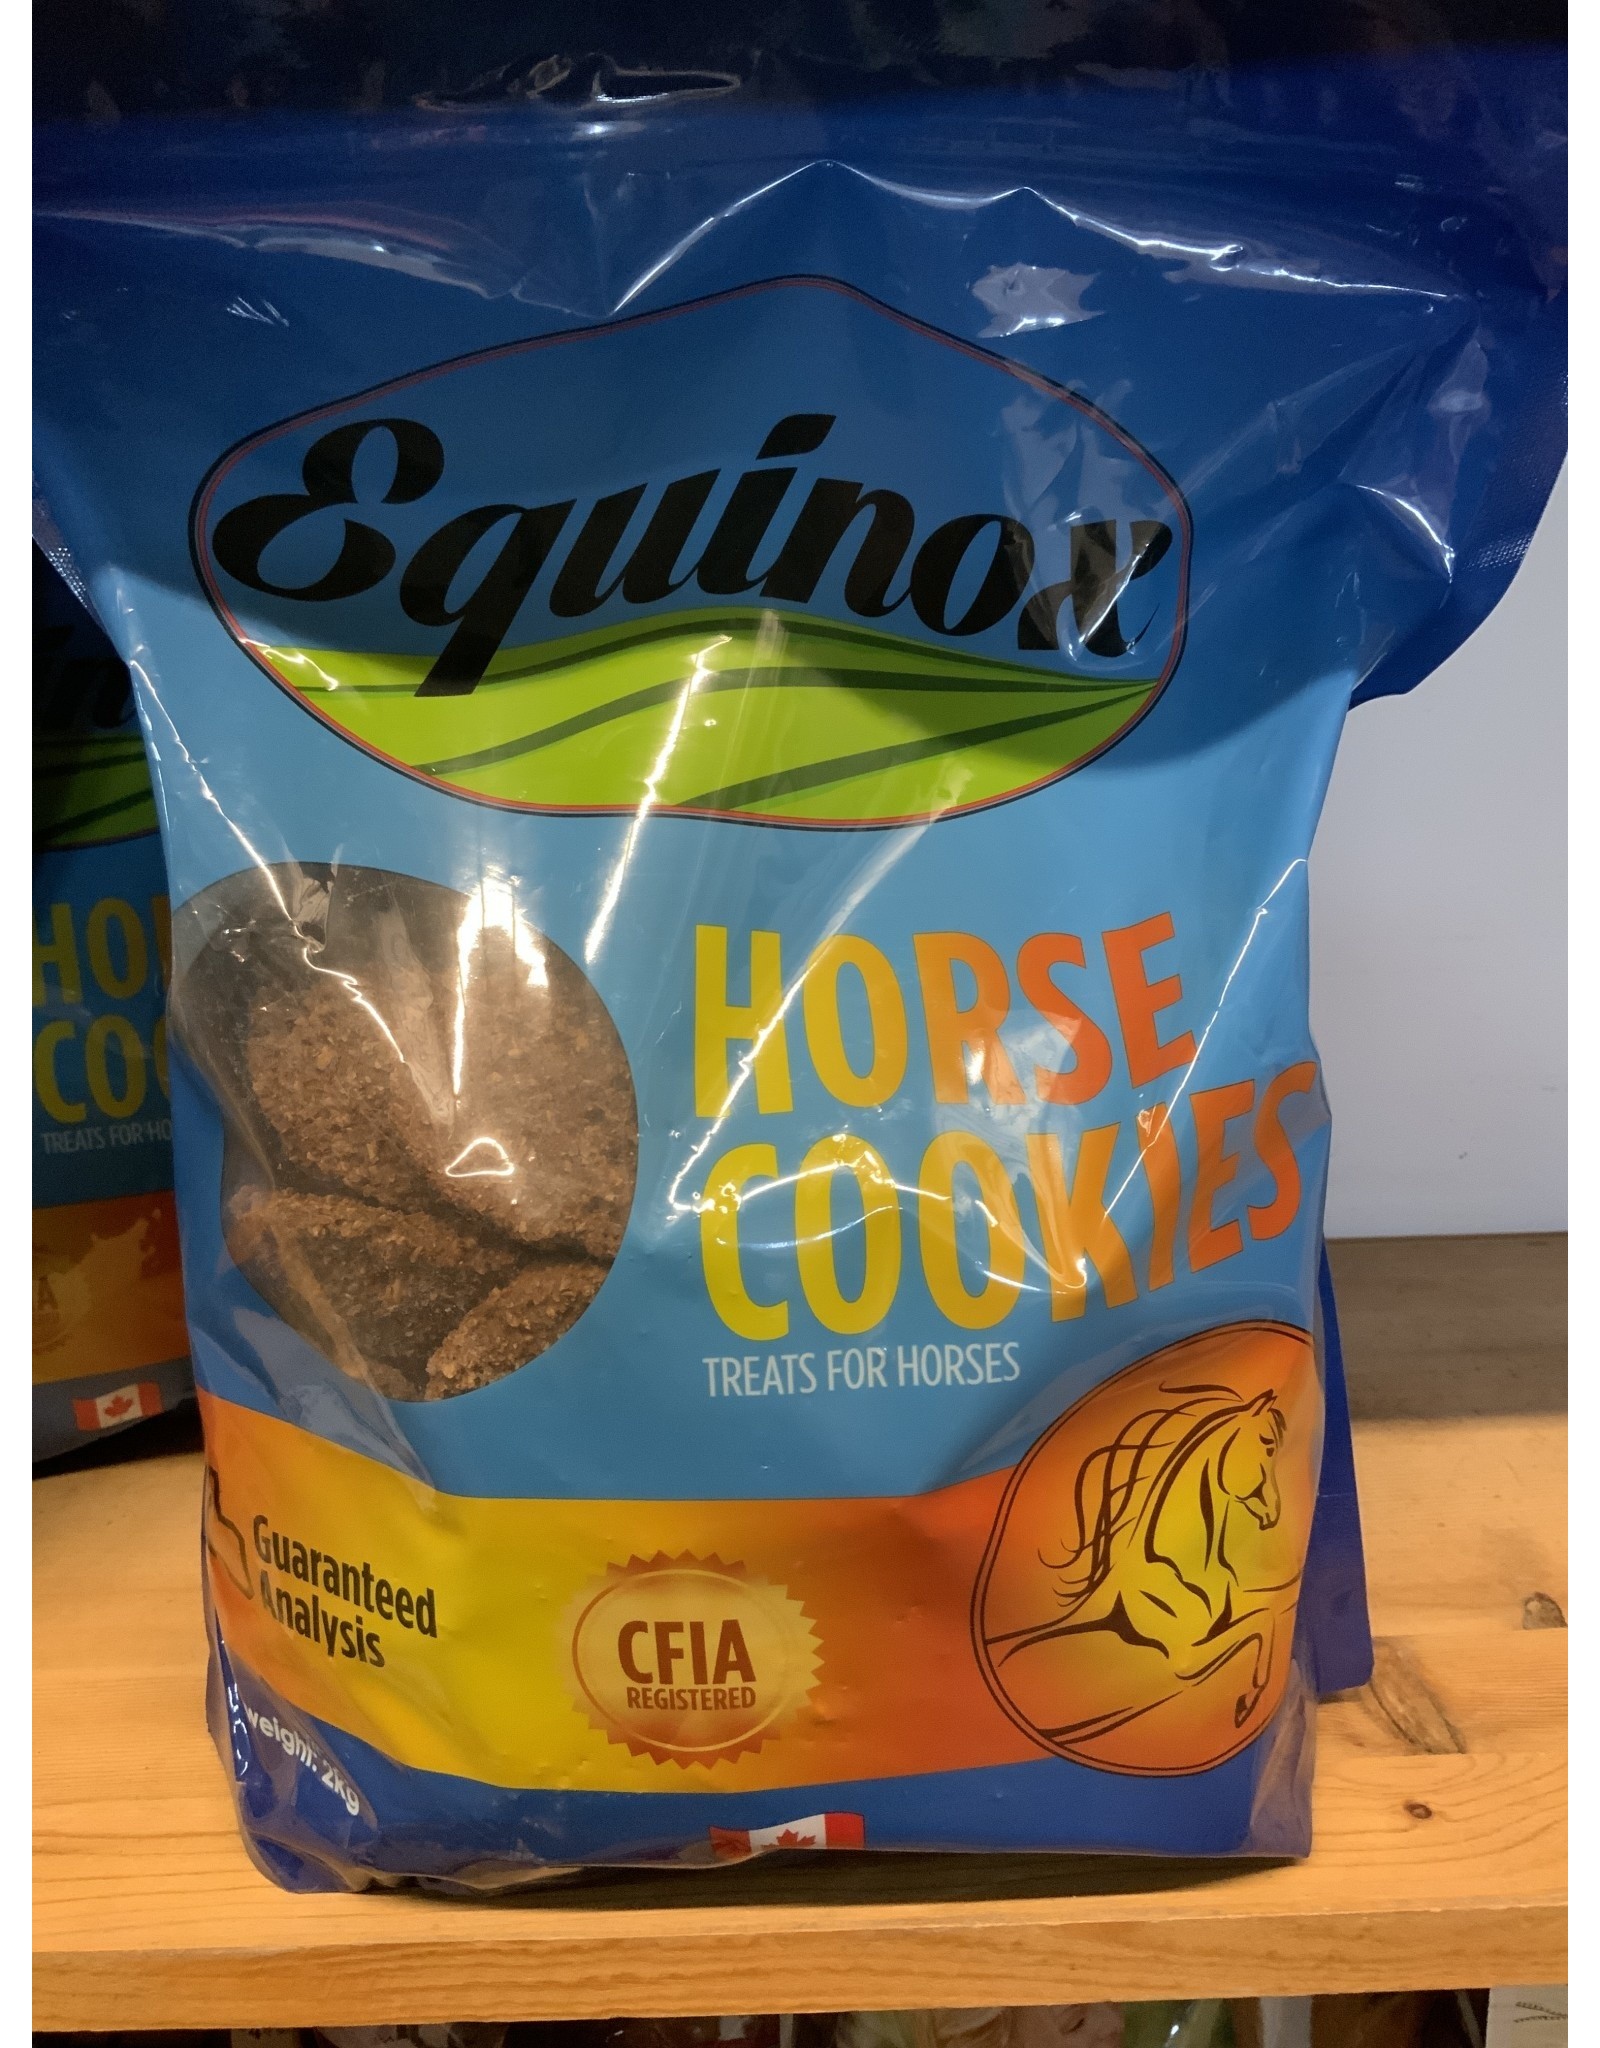 Equinox Horse Cookies - 2kg (comes in case of 6) P2002 - Treat